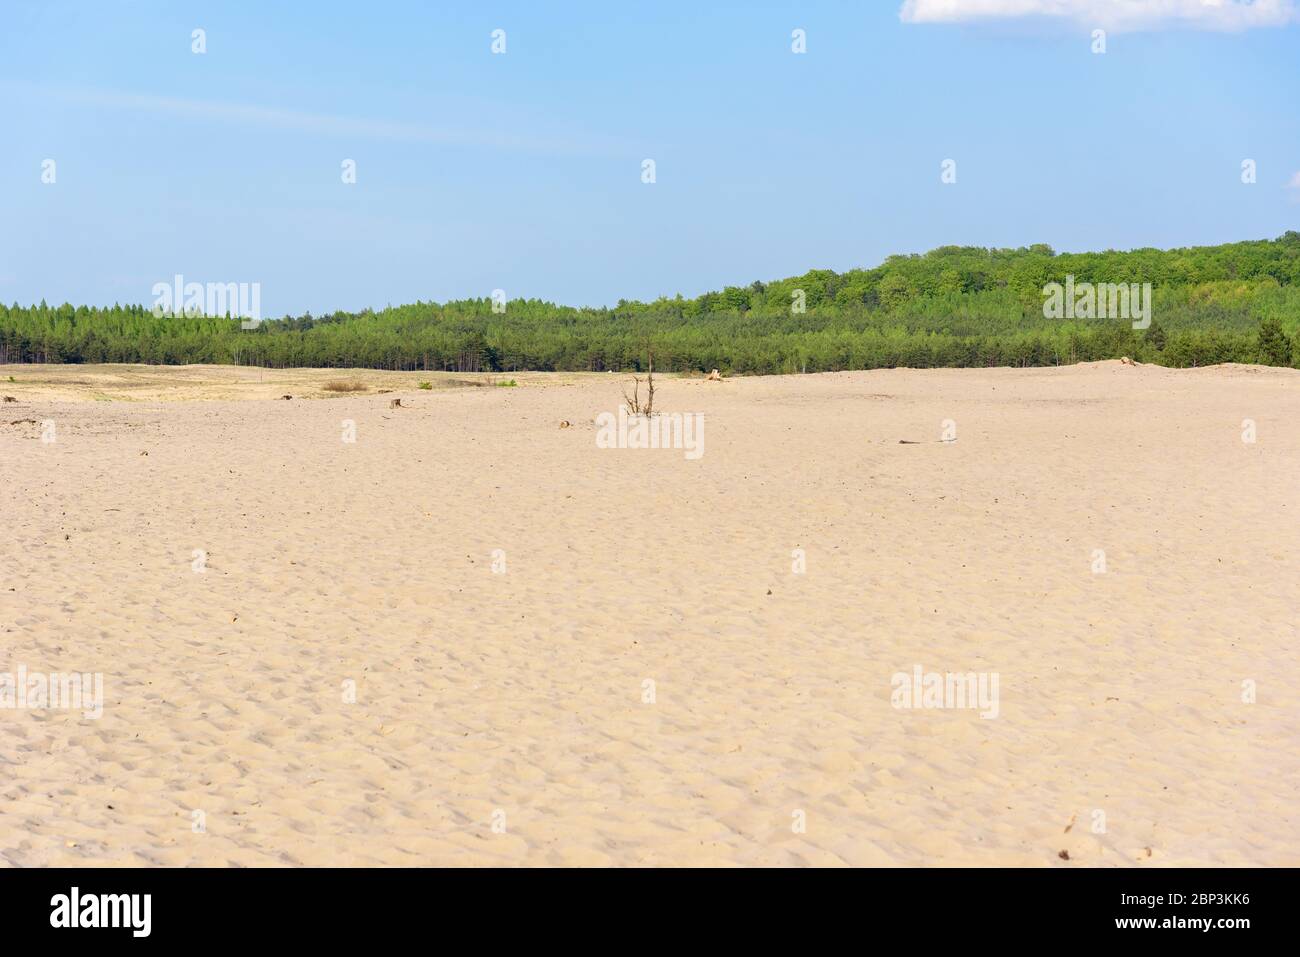 View of Bledow Desert, the biggest sand accumulation away from any sea, located in southern Poland Stock Photo